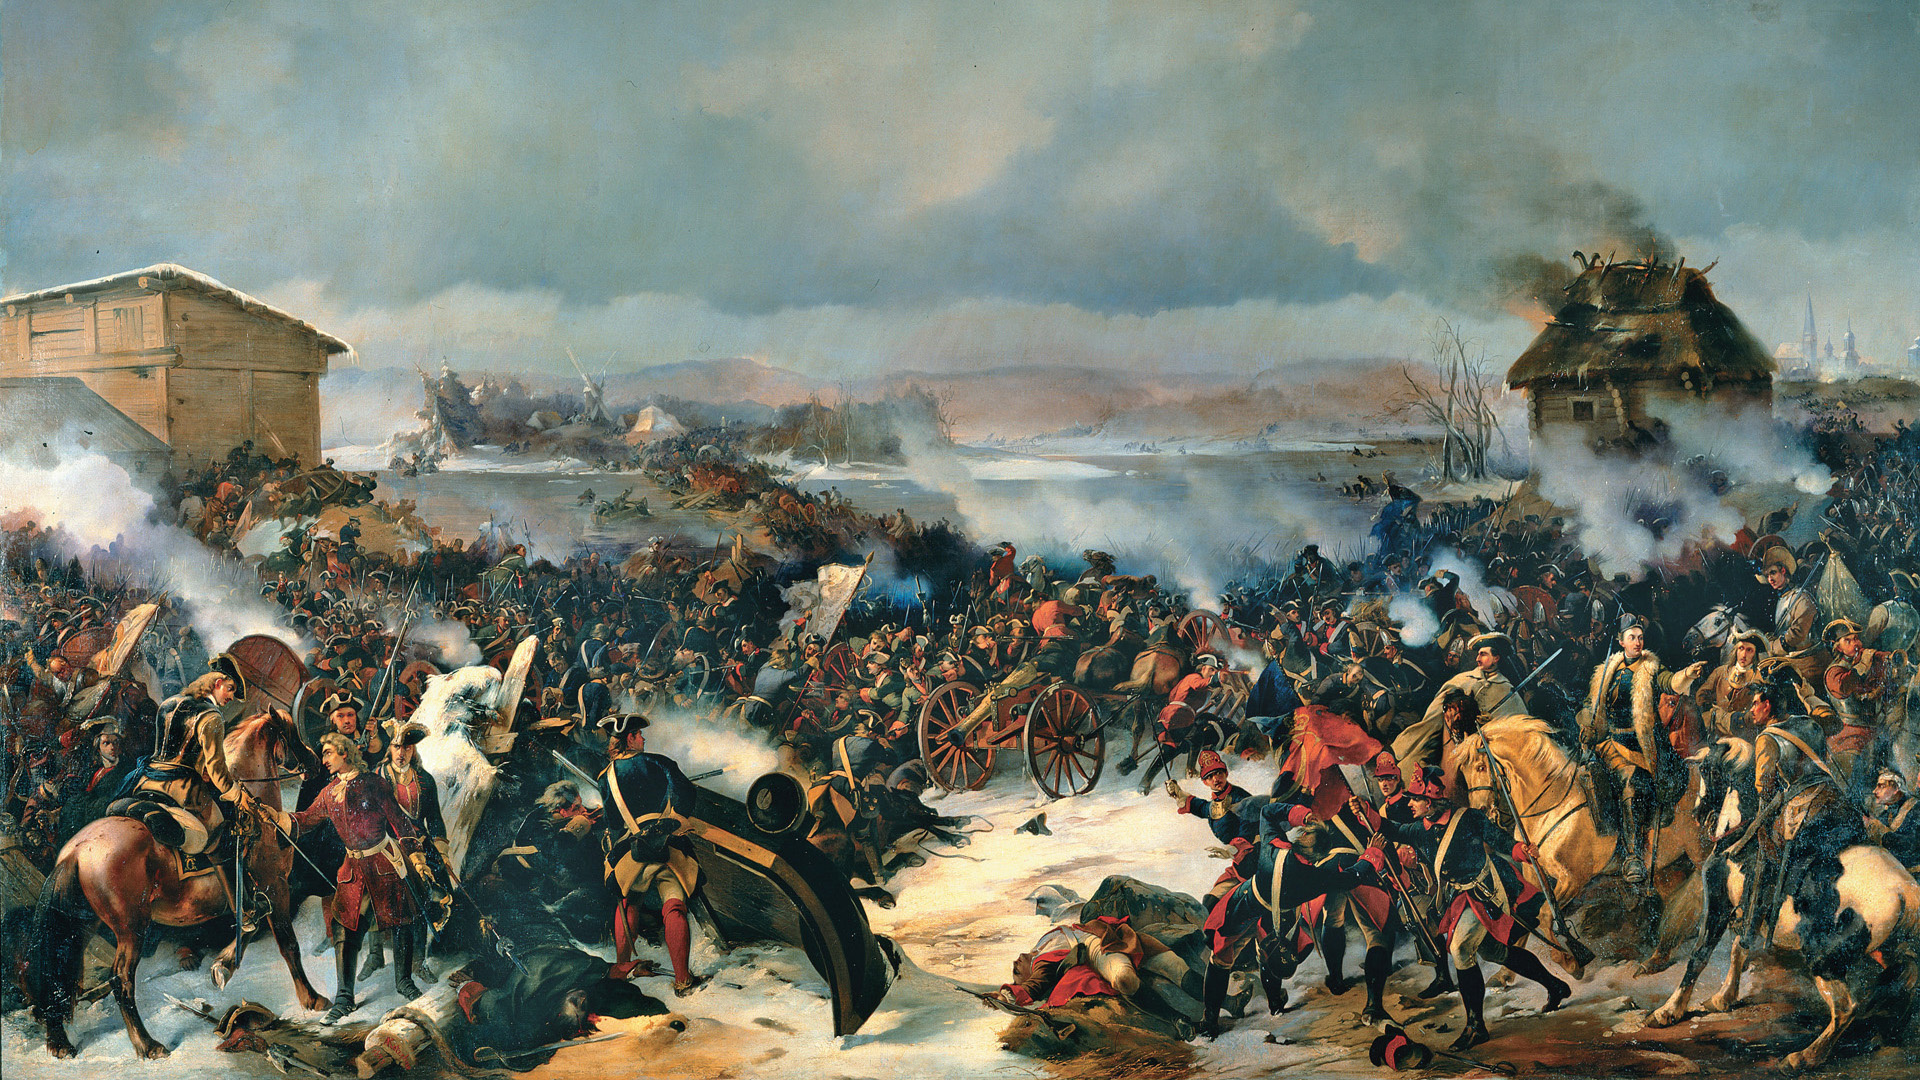 The Battle of Narva was a resounding victory for Swedish King Charles XII over his Russian foe. The young monarch is shown at lower right in Alexander von Kotzebue’s romantic painting.